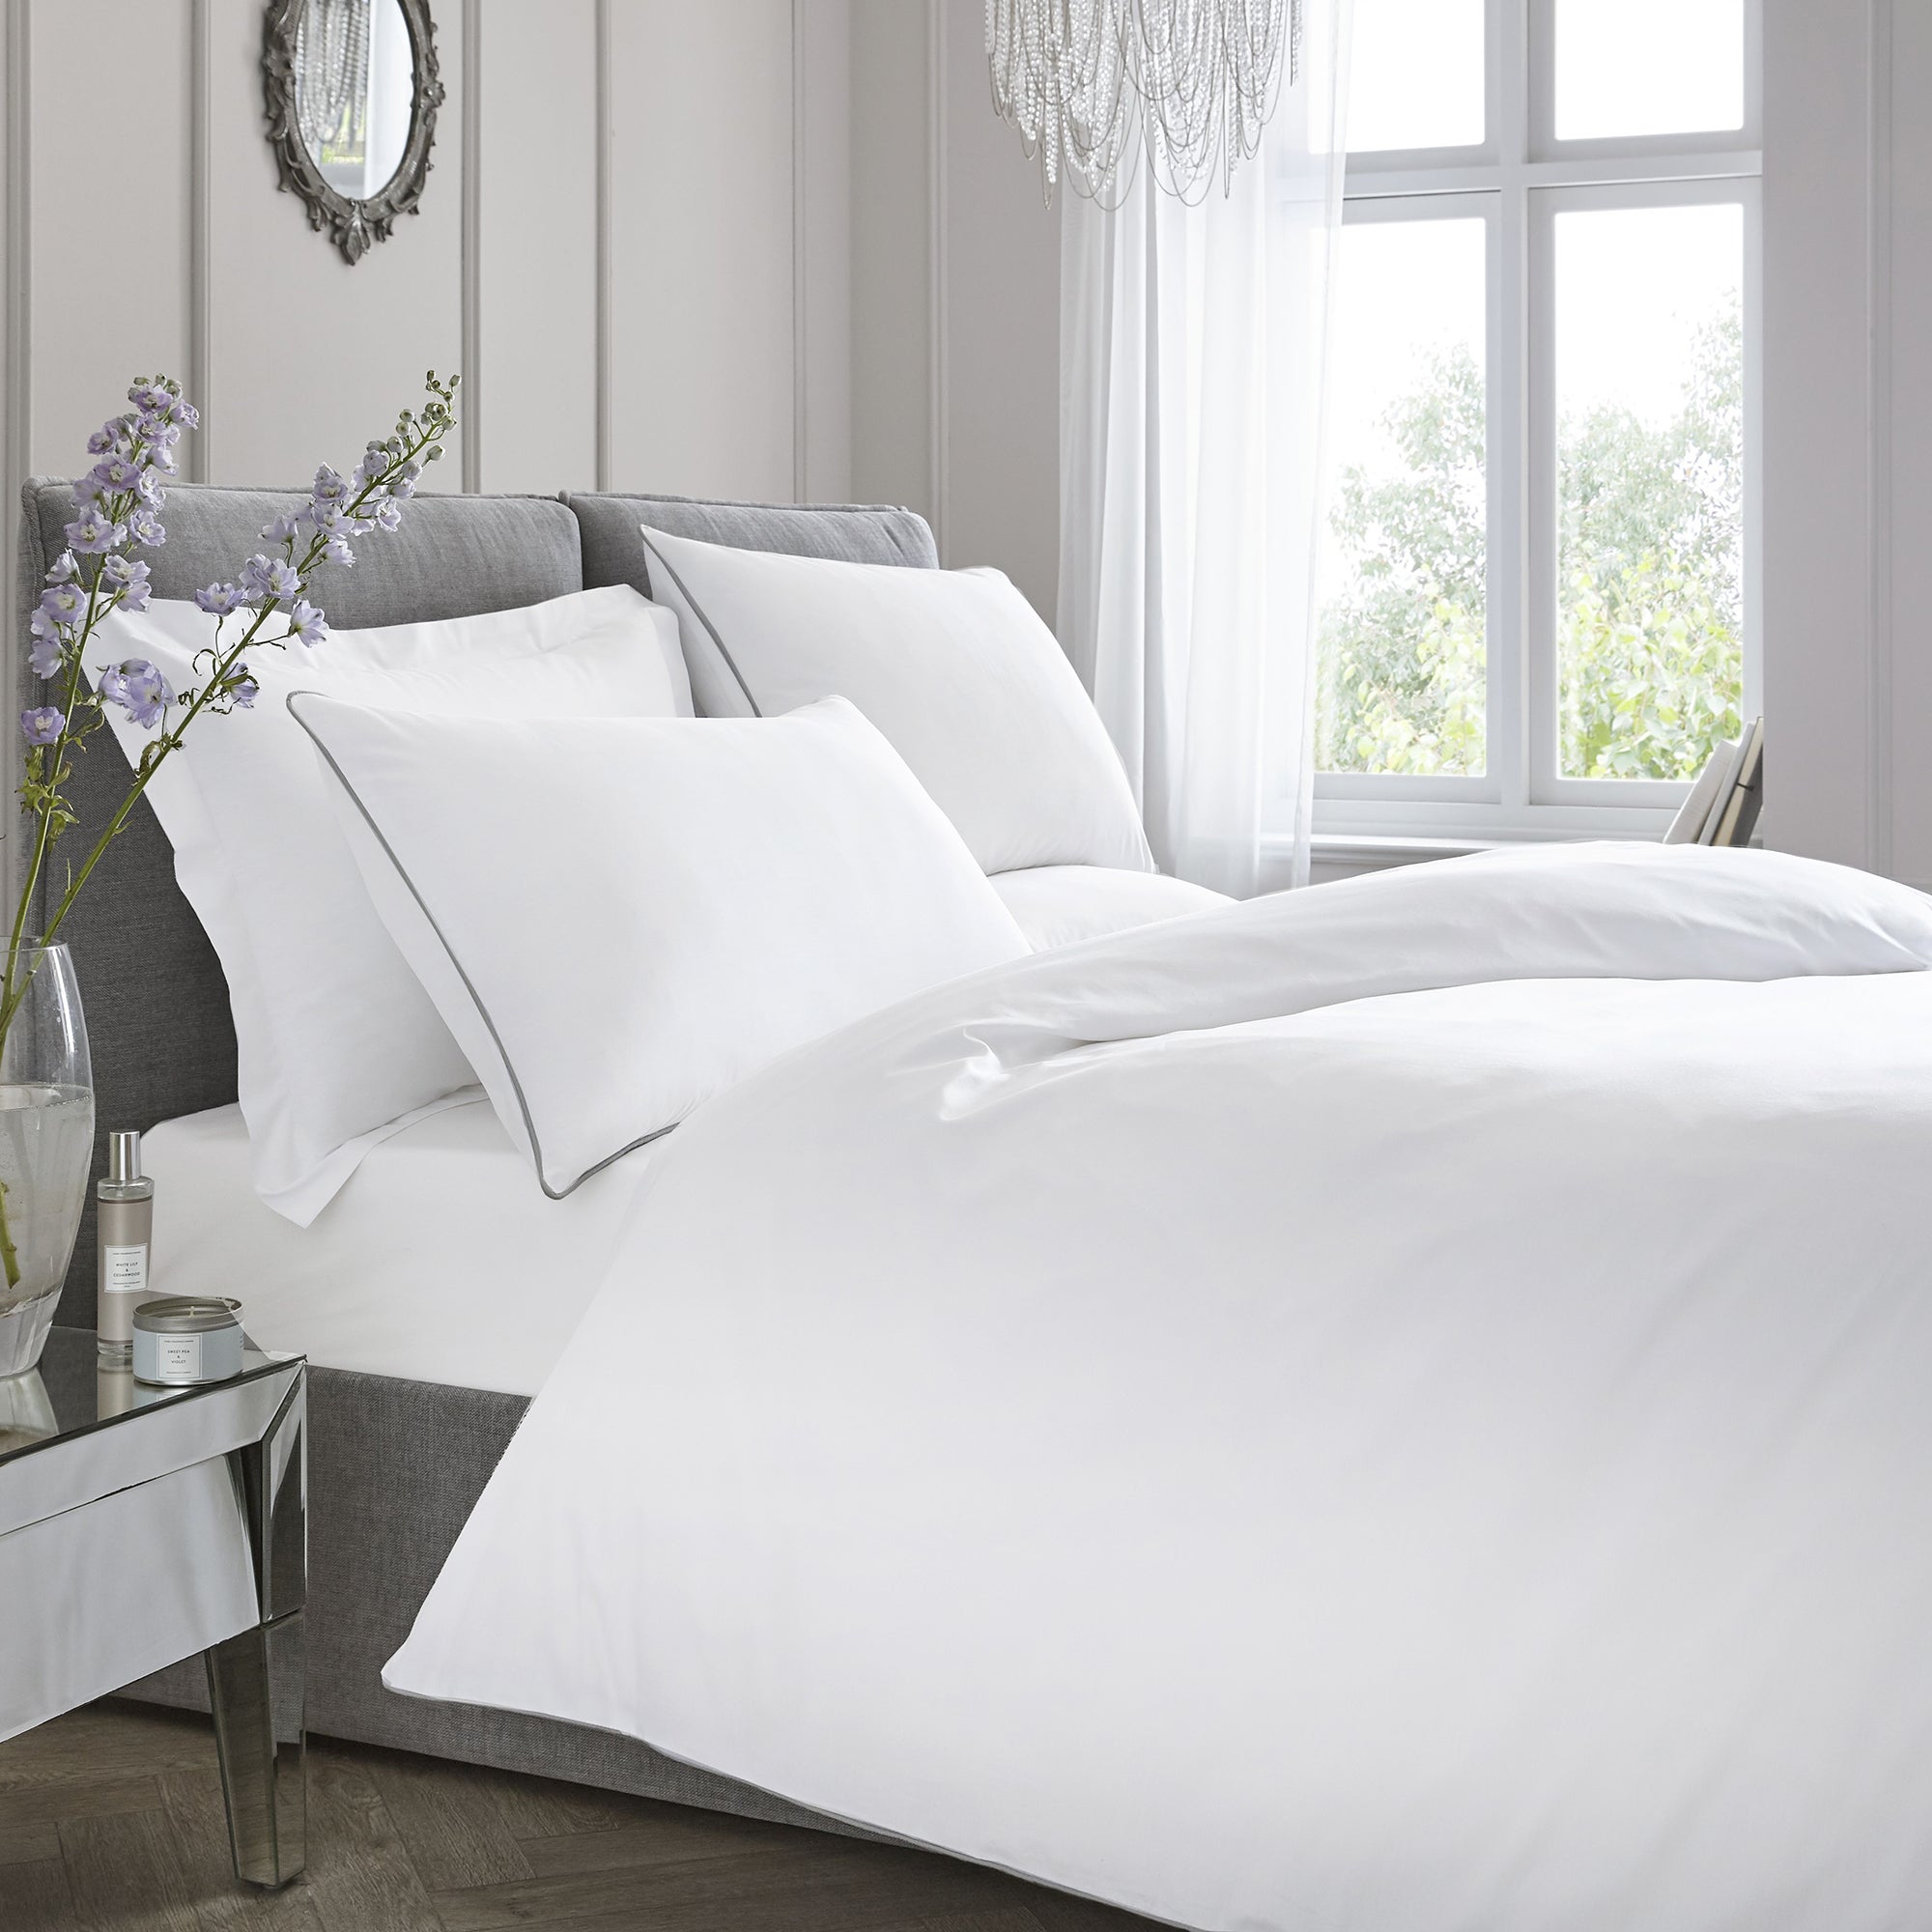 Appletree Piped Cotton Duvet Cover and Pillowcase Set White White